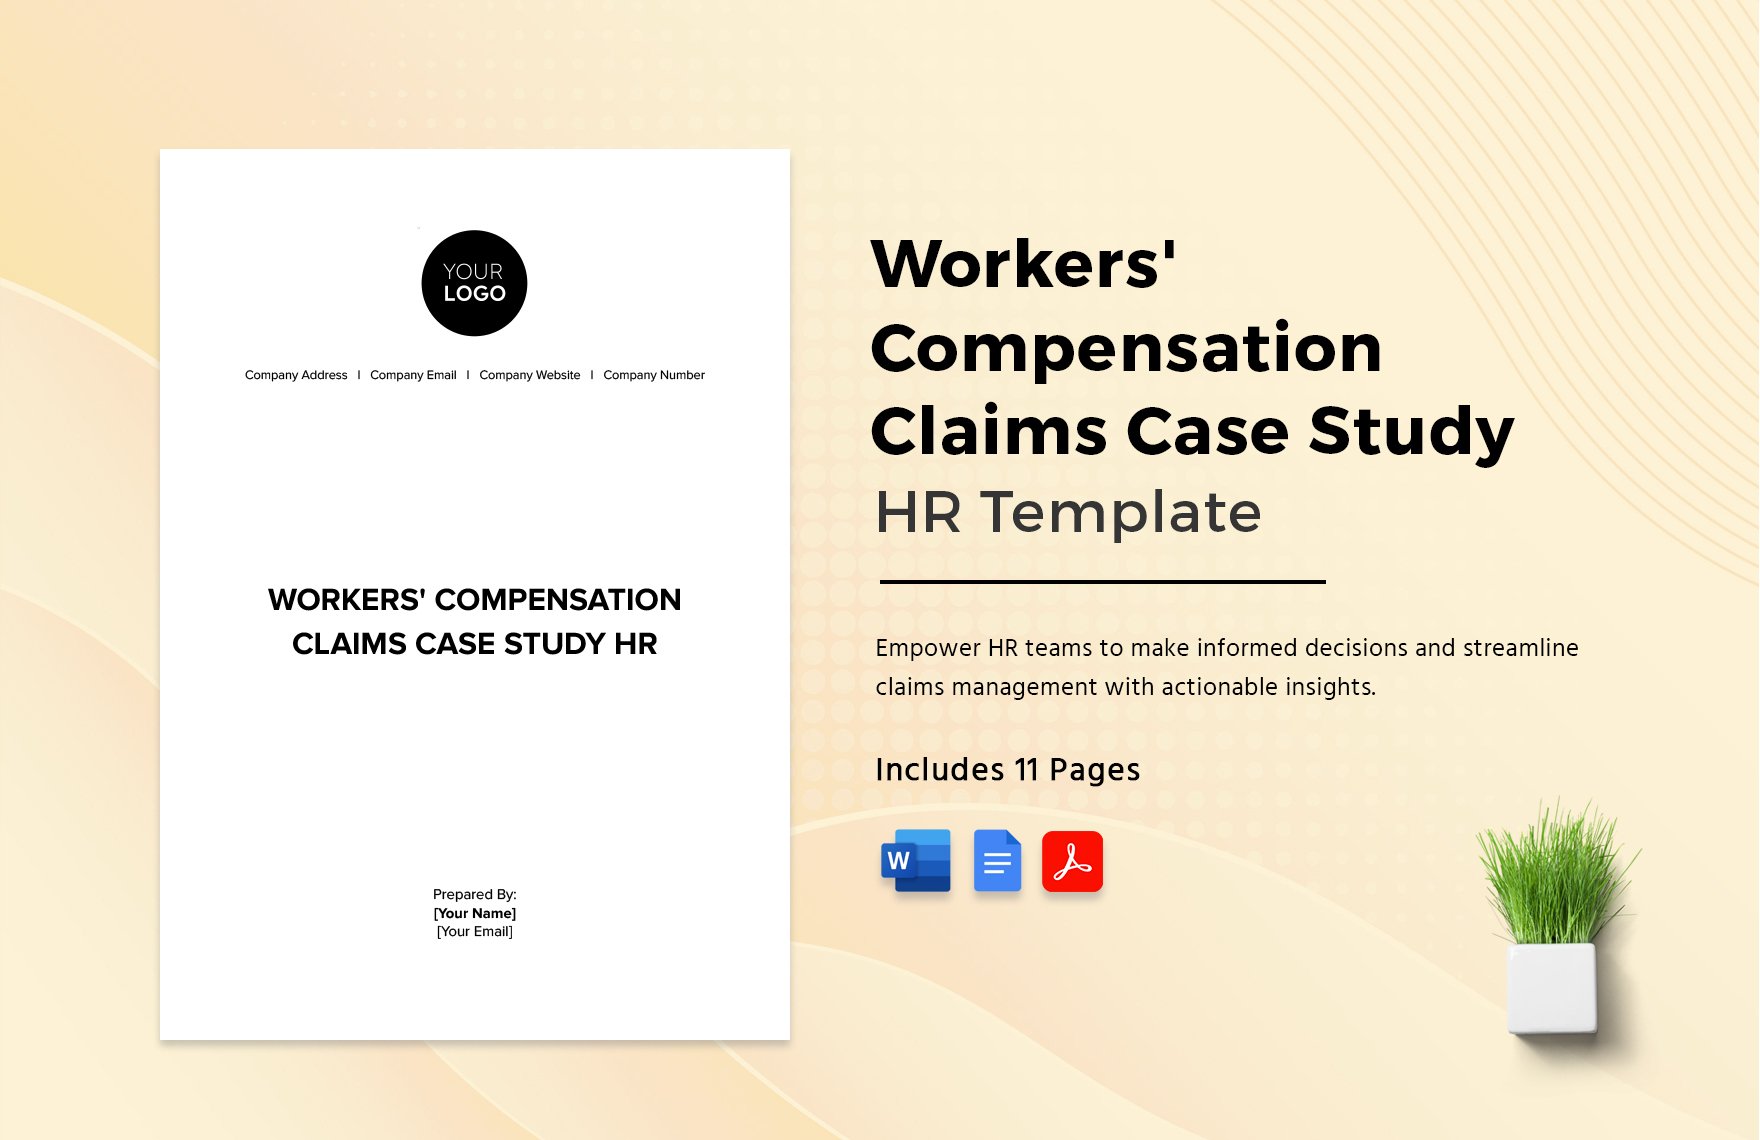 Workers' Compensation Claims Case Study HR Template